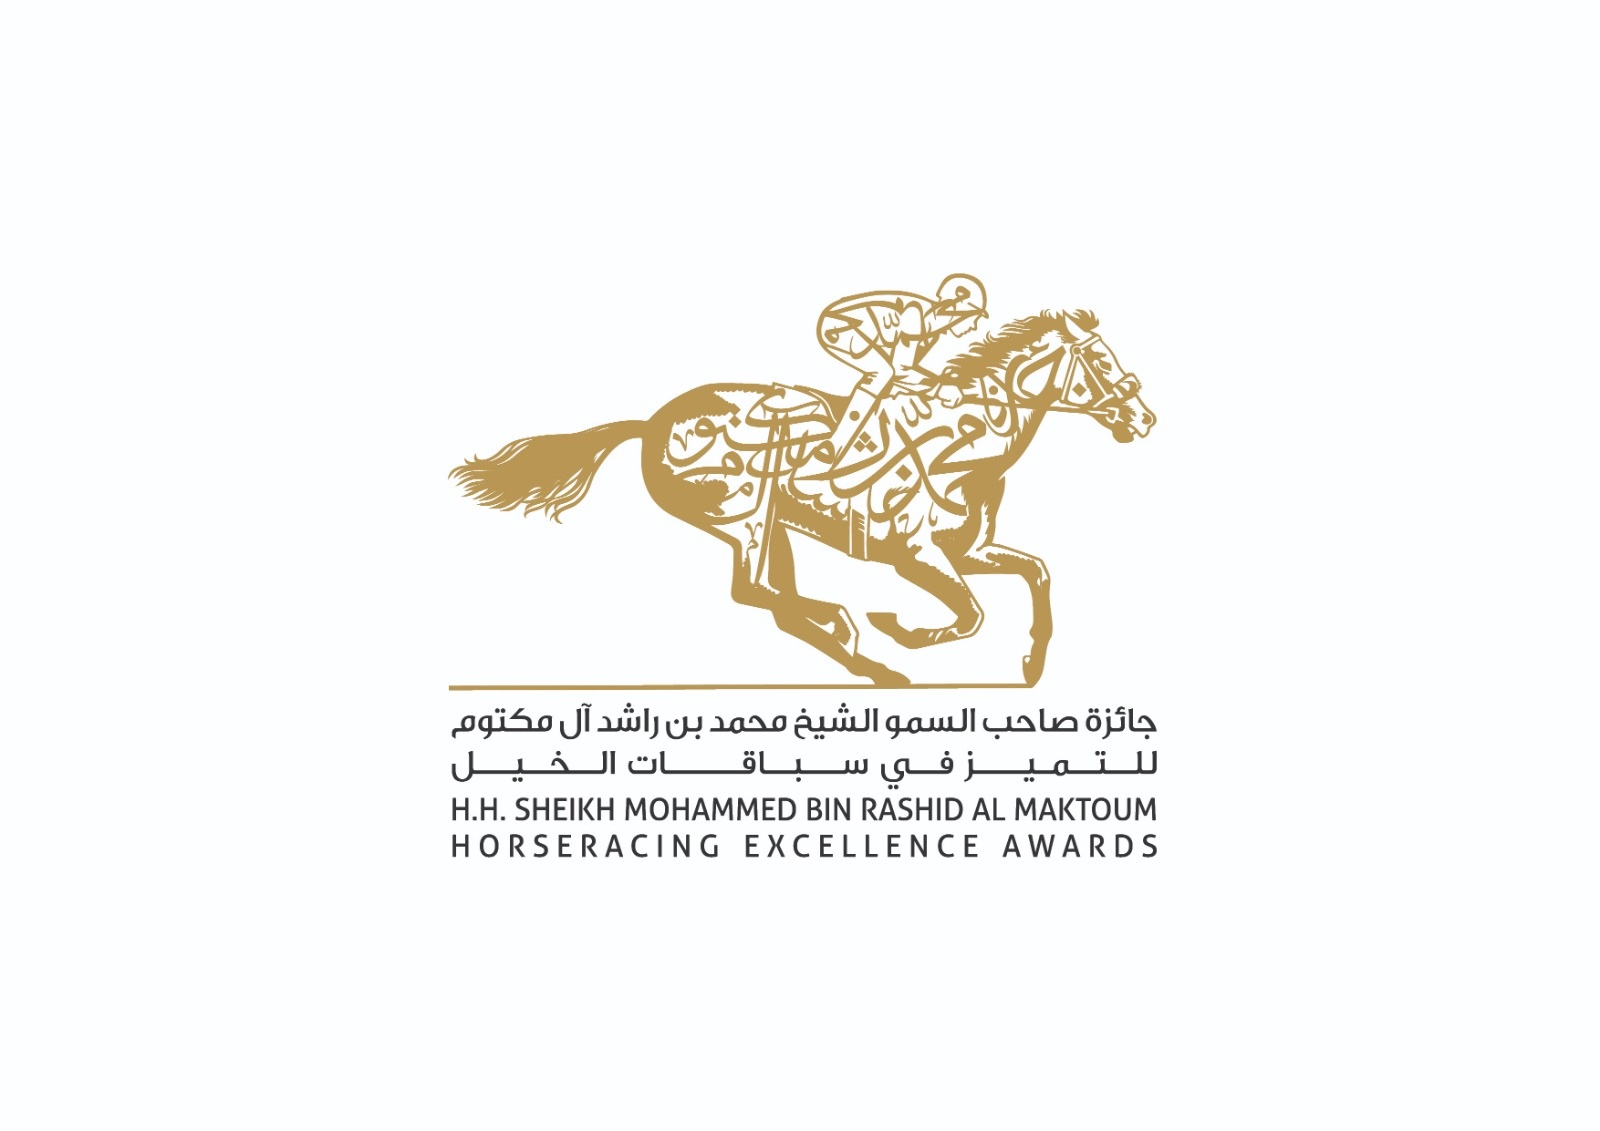 Voting for the Mohammed bin Rashid Award for Excellence in Horse Racing has opened